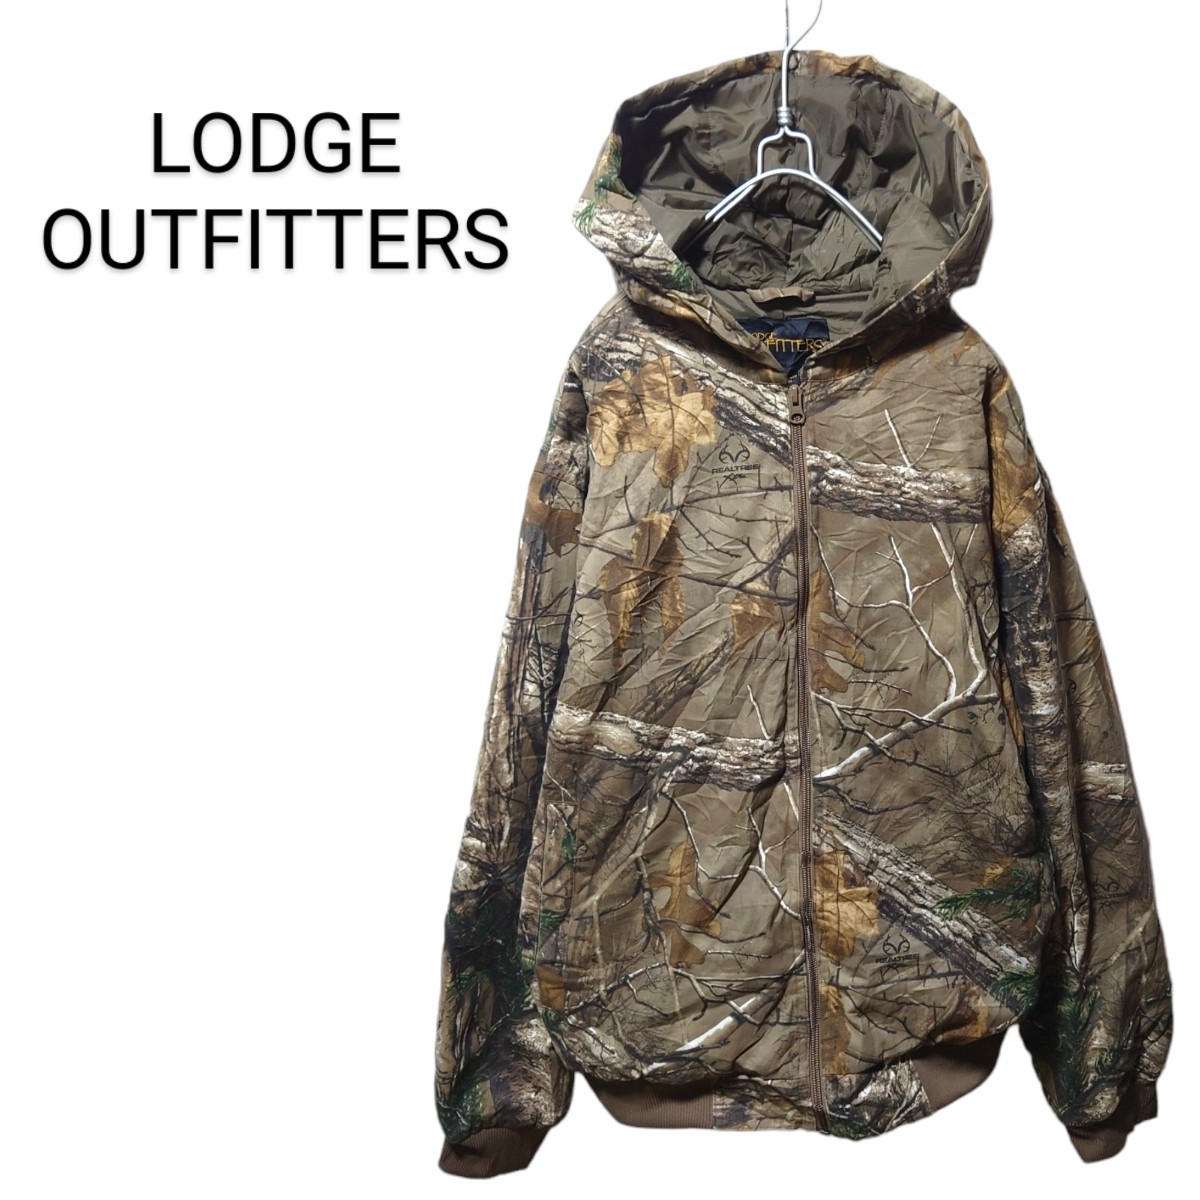 【LODGE OUTFITTERS】リアルツリーカモ 中綿入りブルゾンS-356